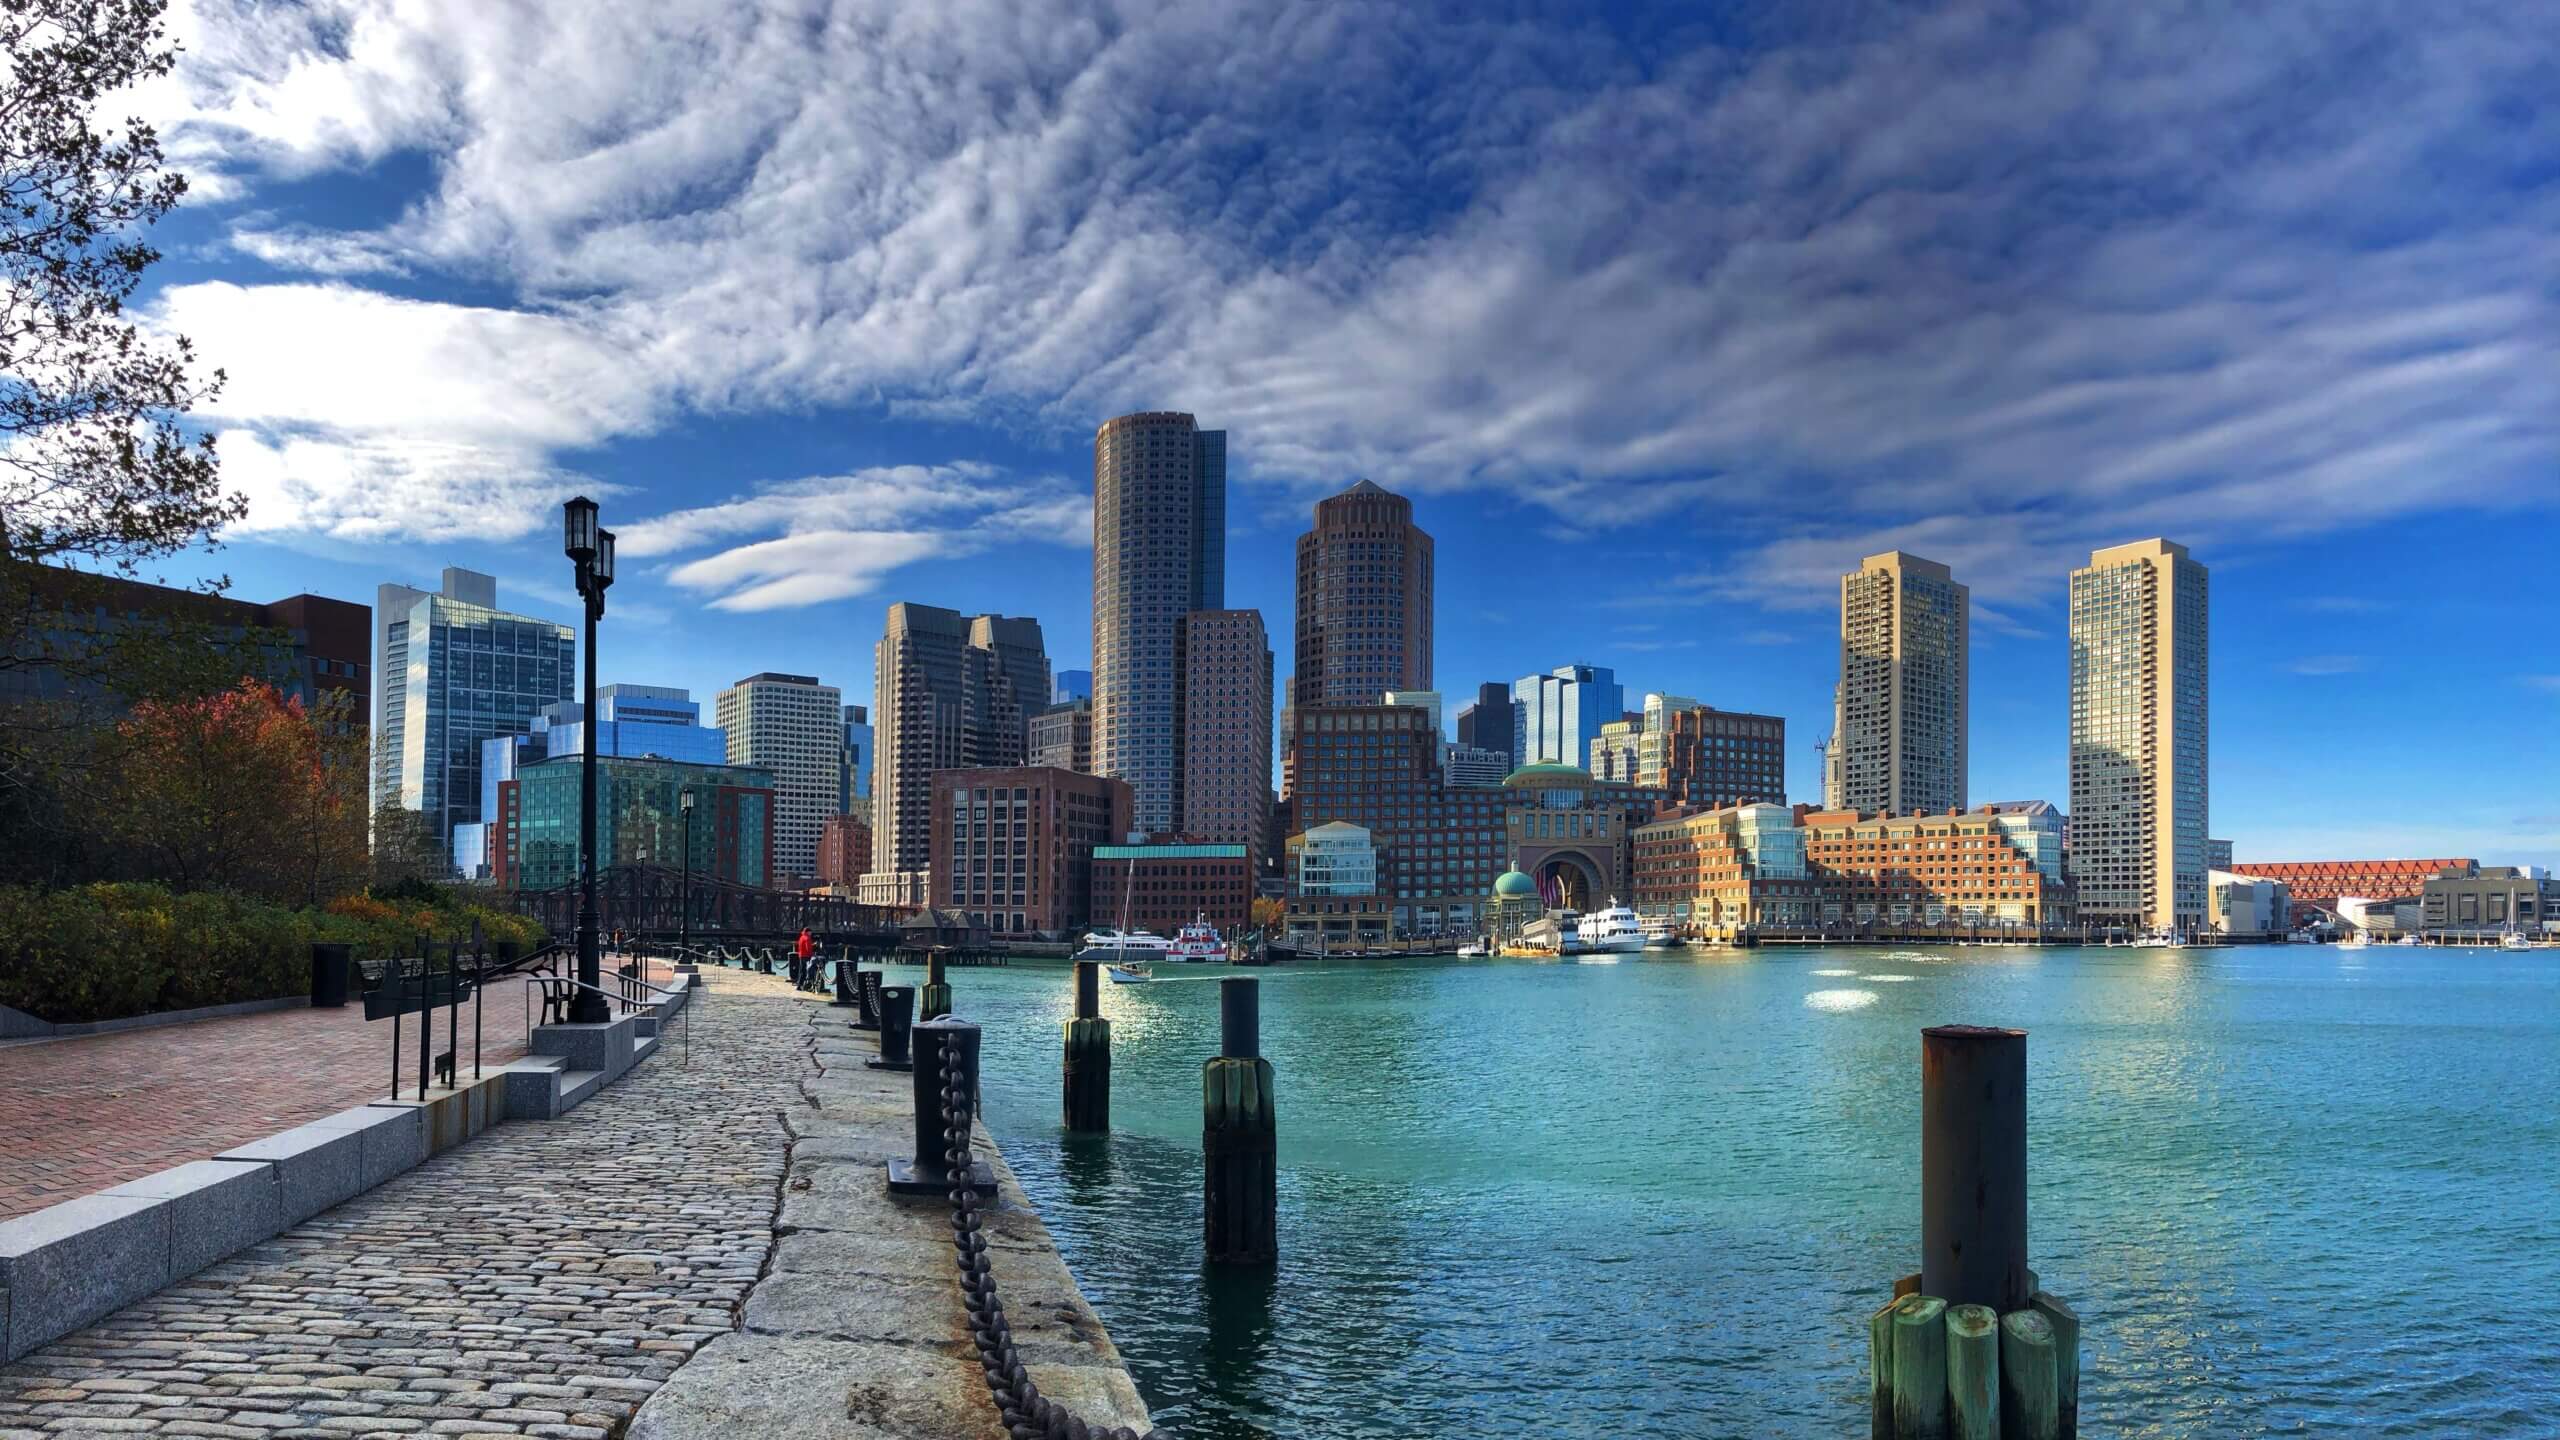 The Most Underrated Neighborhoods to Visit in Boston